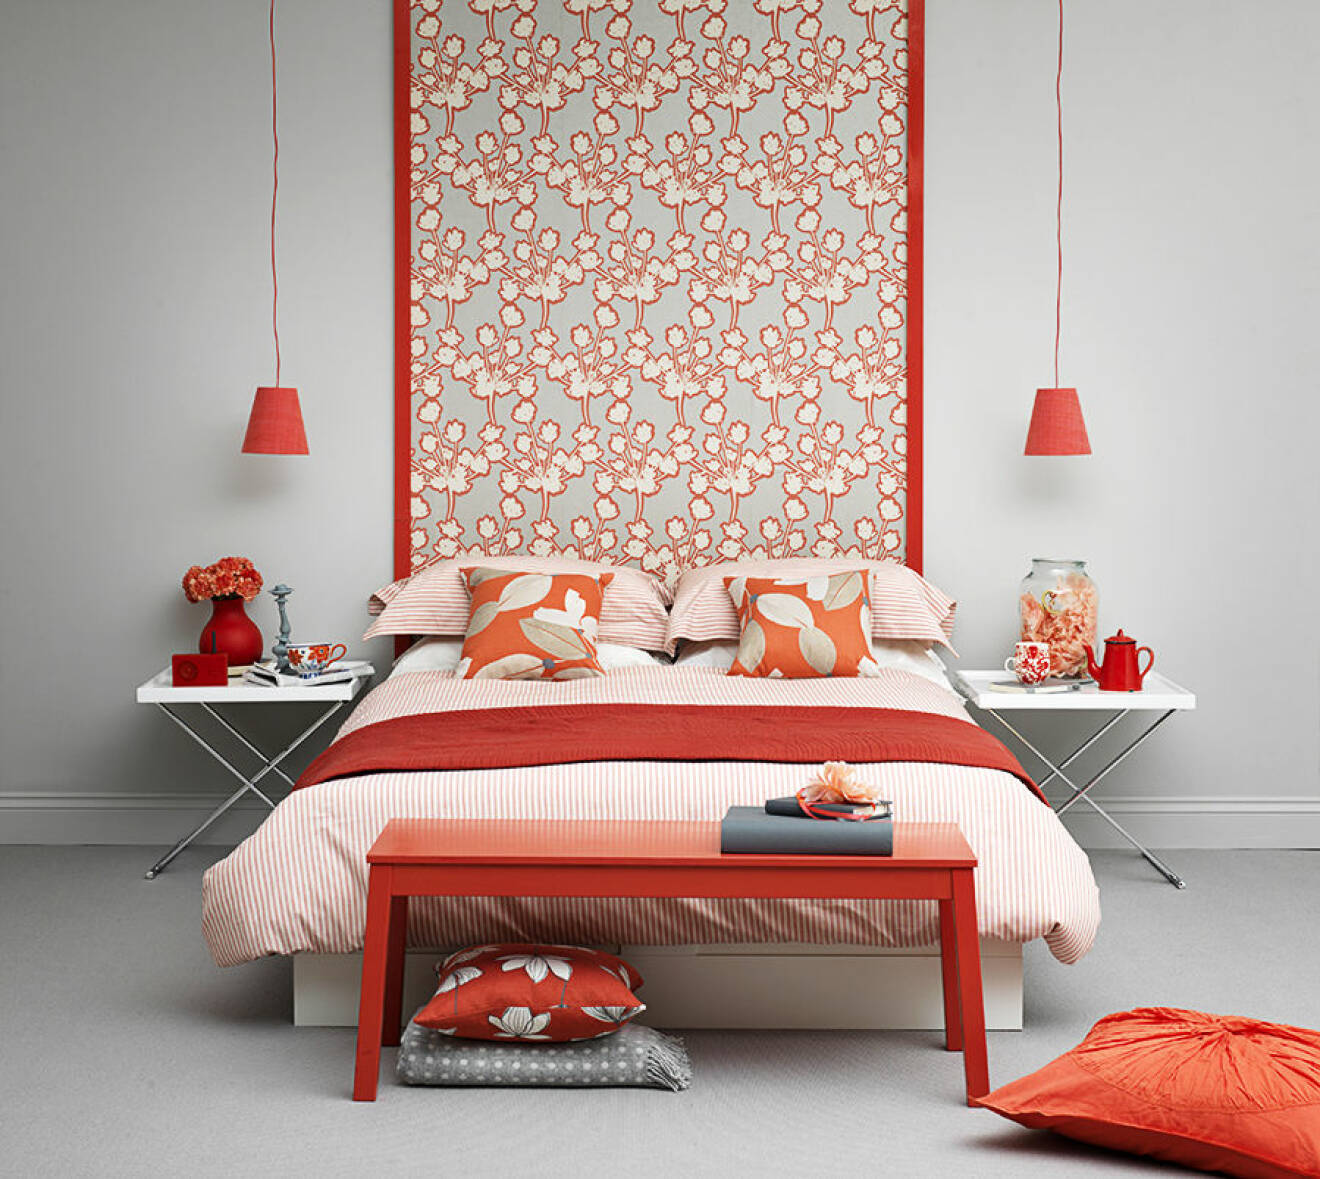 Modern grey and coral bedroom. Grey painted wall with strip of bold grey and coral floral wallpaper framed by coral lamp shades hanging from long cords, white folding bedside tray tables, striped coral and white bedding, red bench style table at tip of bed, grey carpet on floor, IH 05/2012 Pub Orig